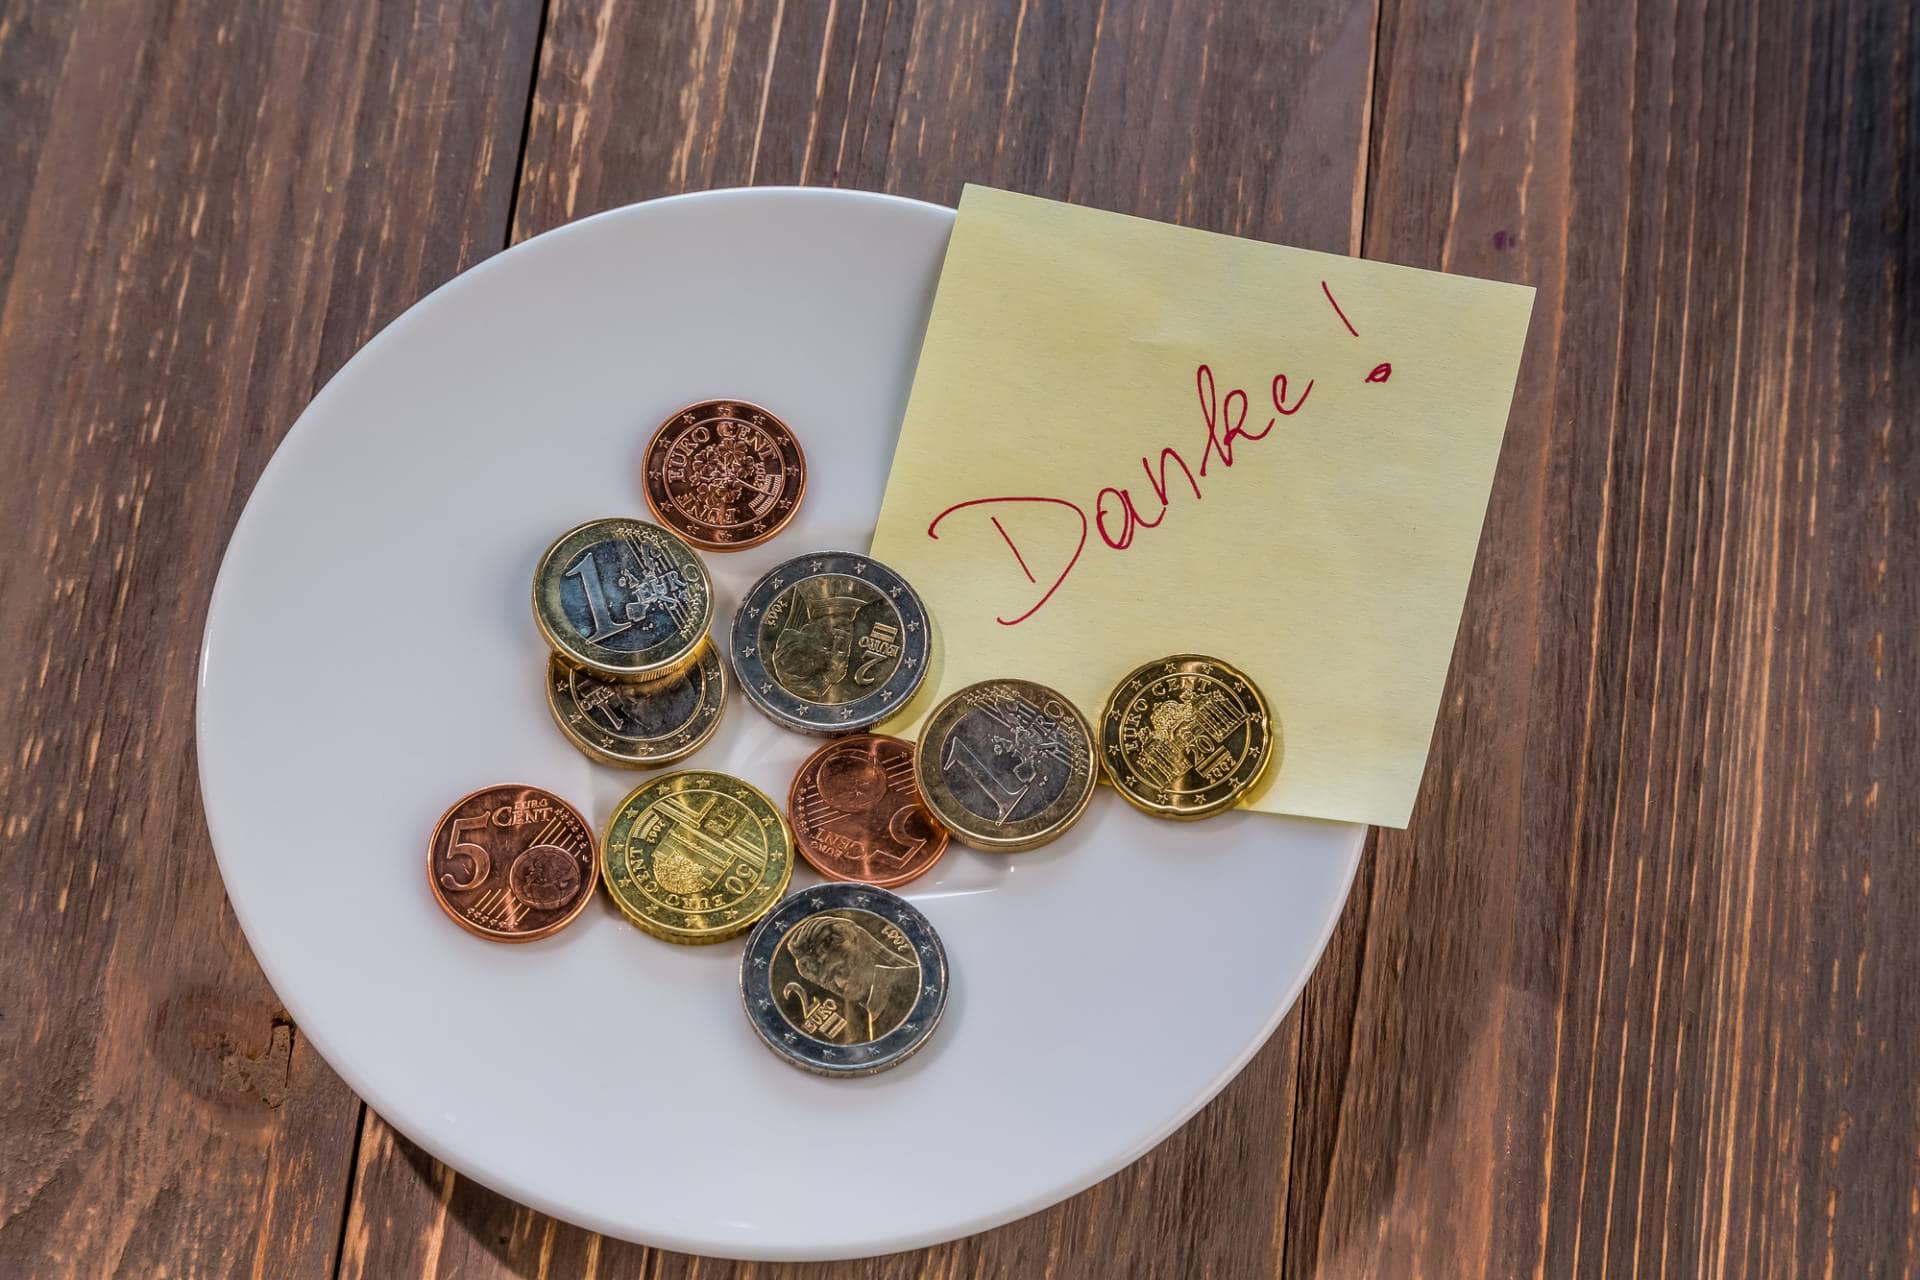 Should I leave a tip when dining out?